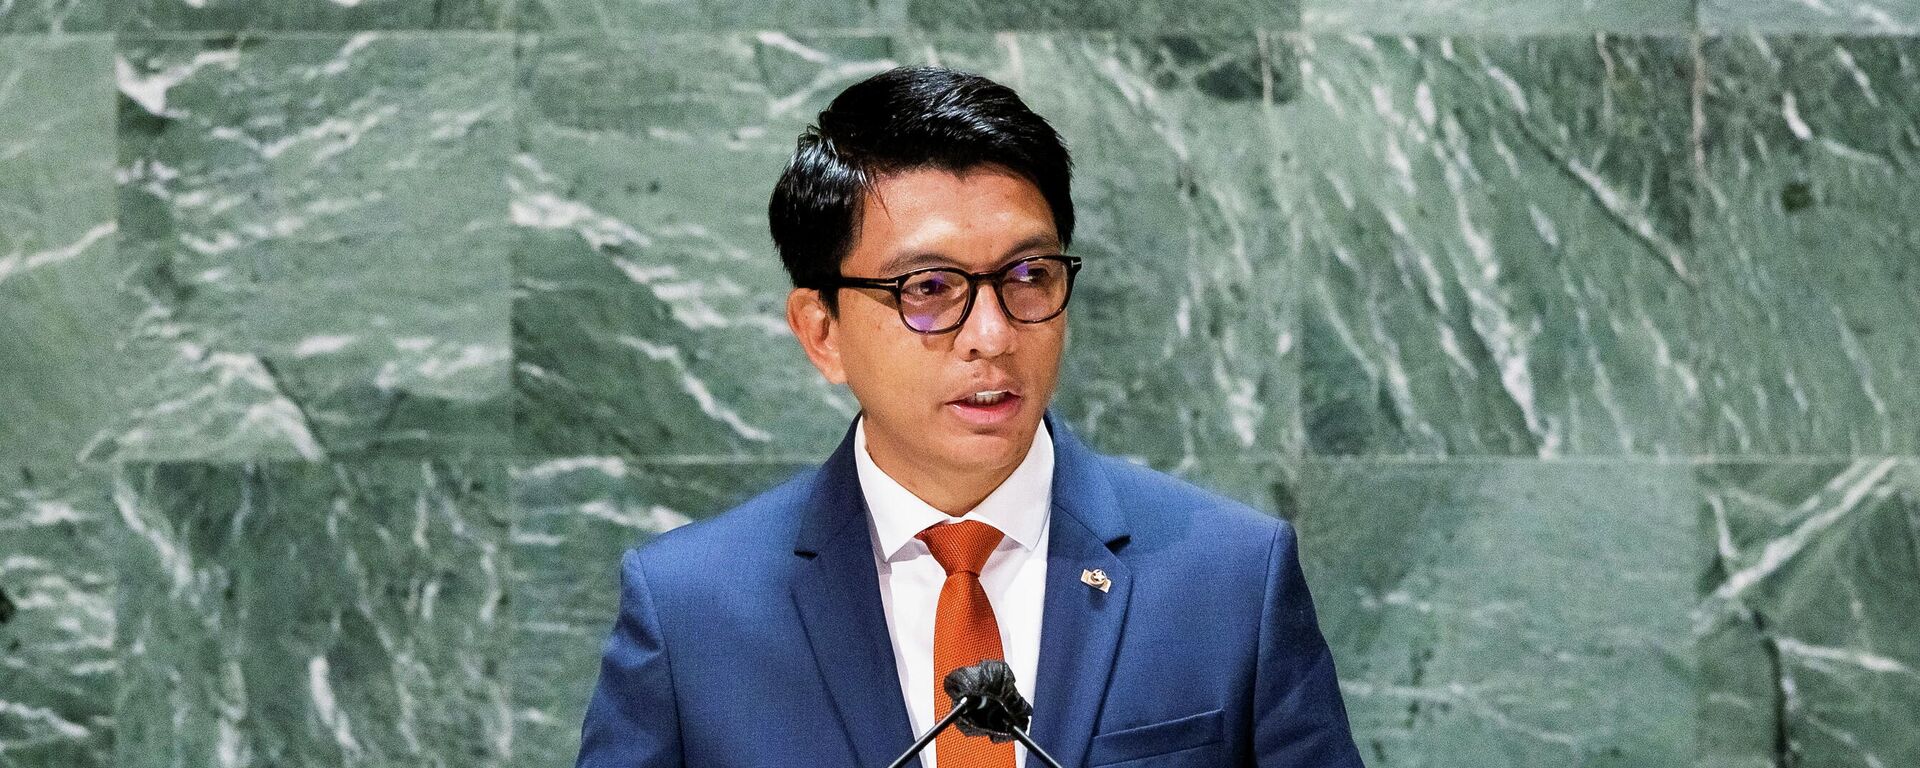 Madagascar’s President Andry Nirina Rajoelina addresses the General Debate of the 76th Session of the United Nations General Assembly in New York City, U.S., September 22, 2021. - Sputnik International, 1920, 24.09.2021